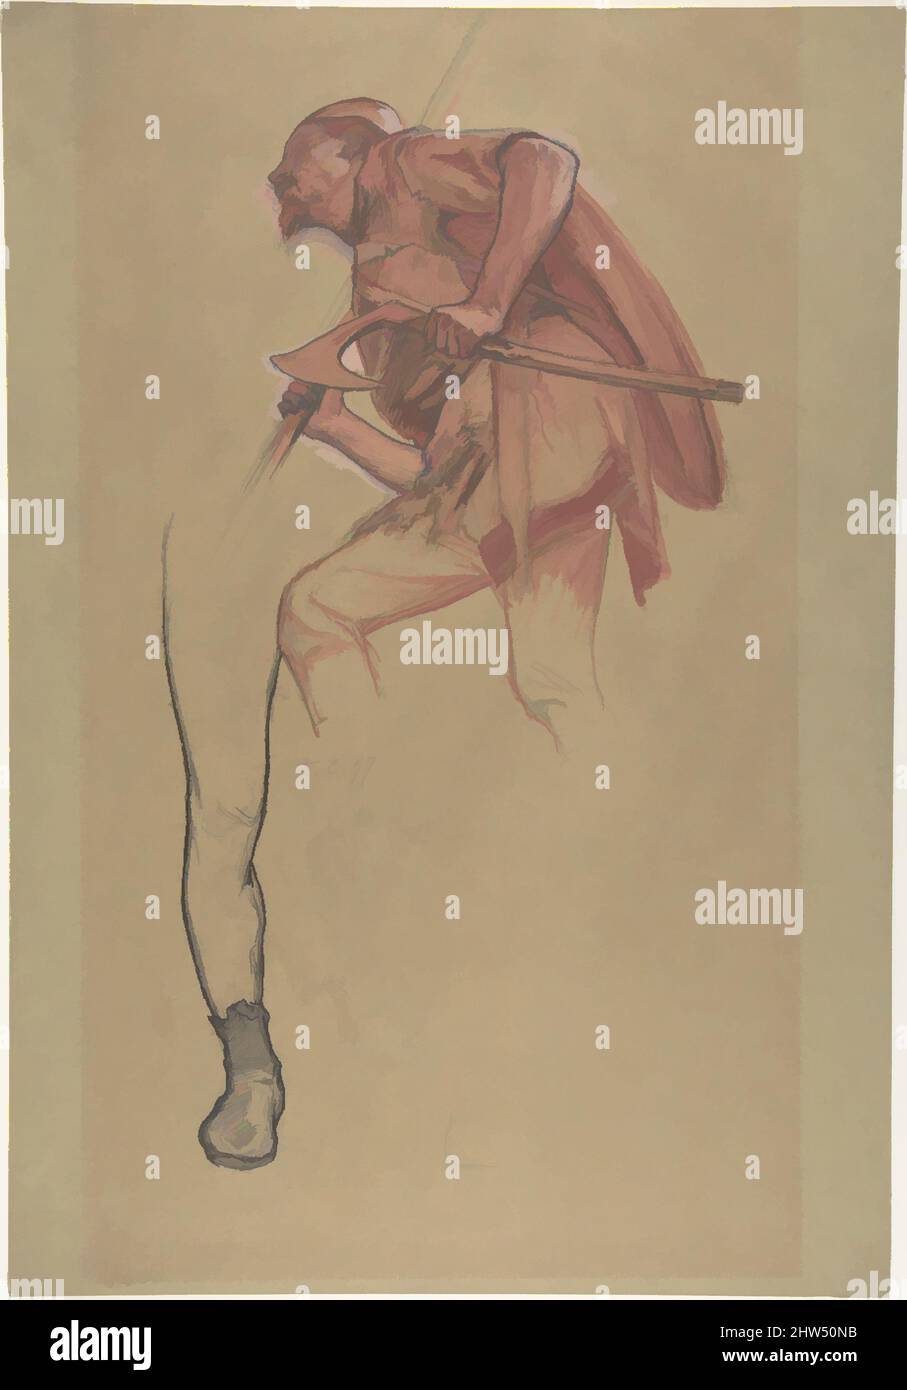 Art inspired by Warrior with an Axe and Study of a Leg, 1897, Graphite, red and white oil paint, pen and brown ink, Sheet: 20 x 13 13/16 in. (50.8 x 35.1cm), Drawings, Fernand Cormon (French, Paris 1854–1924 Paris, Classic works modernized by Artotop with a splash of modernity. Shapes, color and value, eye-catching visual impact on art. Emotions through freedom of artworks in a contemporary way. A timeless message pursuing a wildly creative new direction. Artists turning to the digital medium and creating the Artotop NFT Stock Photo